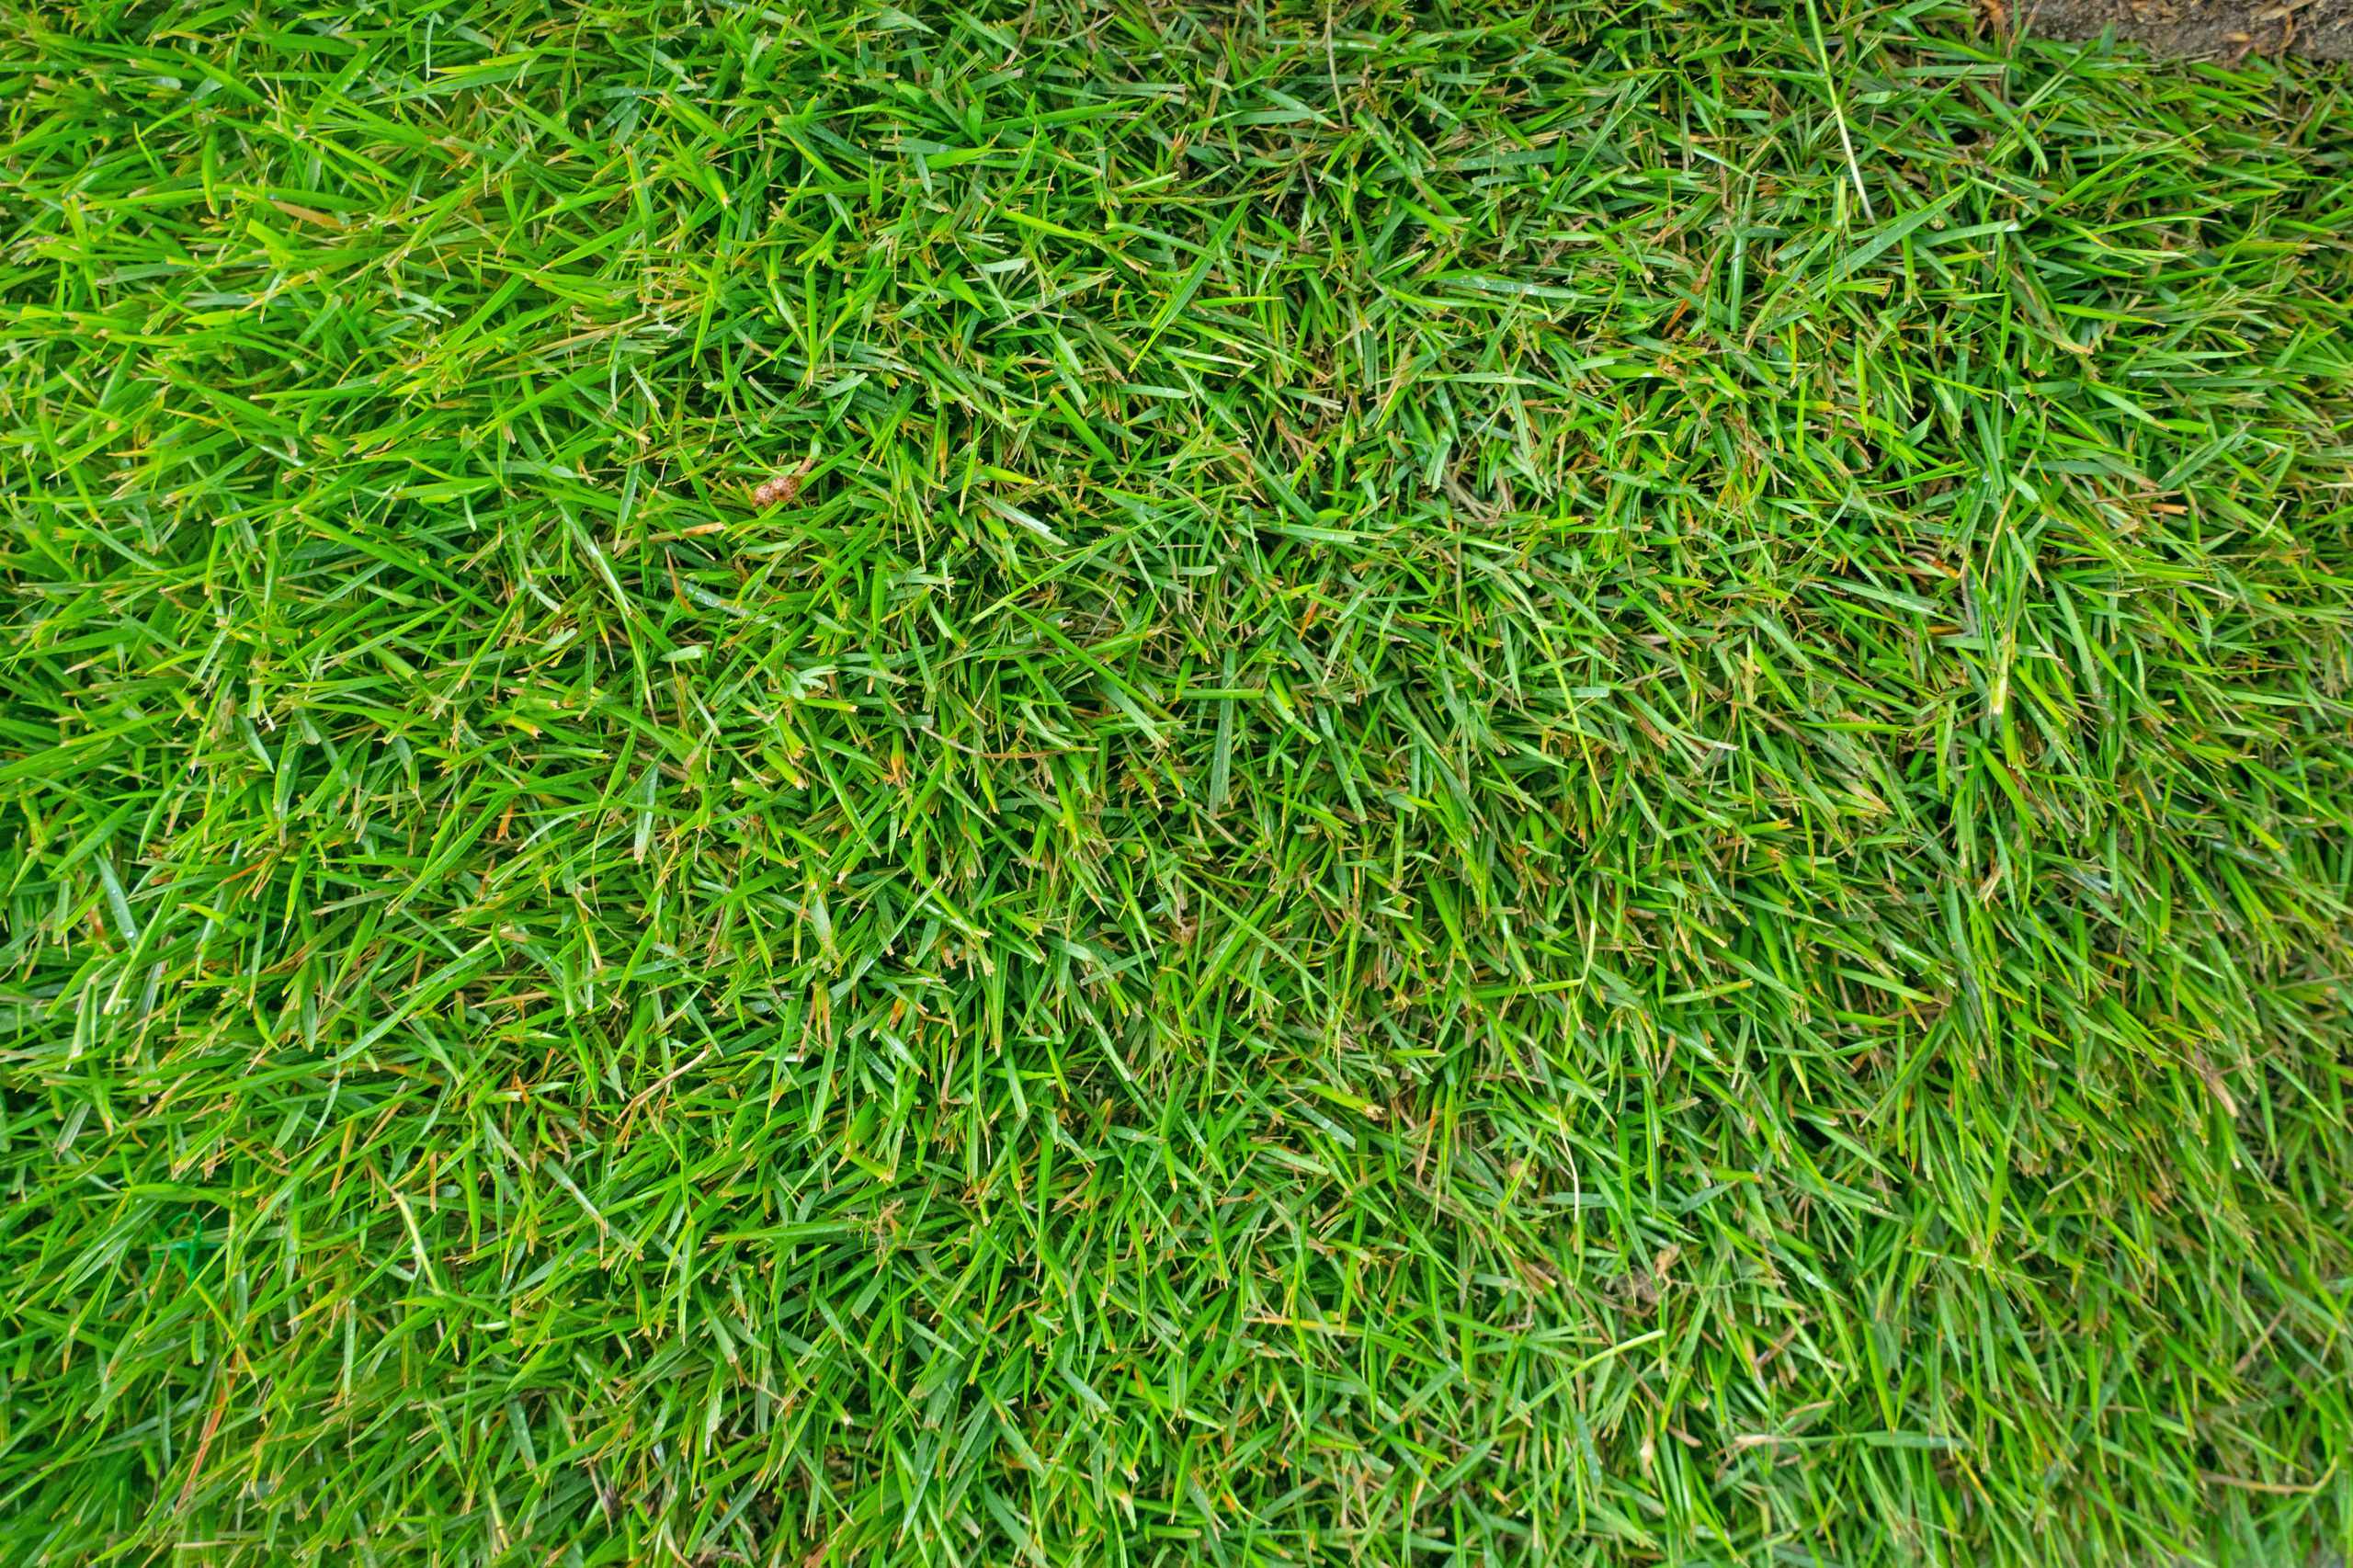 Innovation Zoysiagrass Delivers Cold Tolerance & Improved Turfgrass Quality